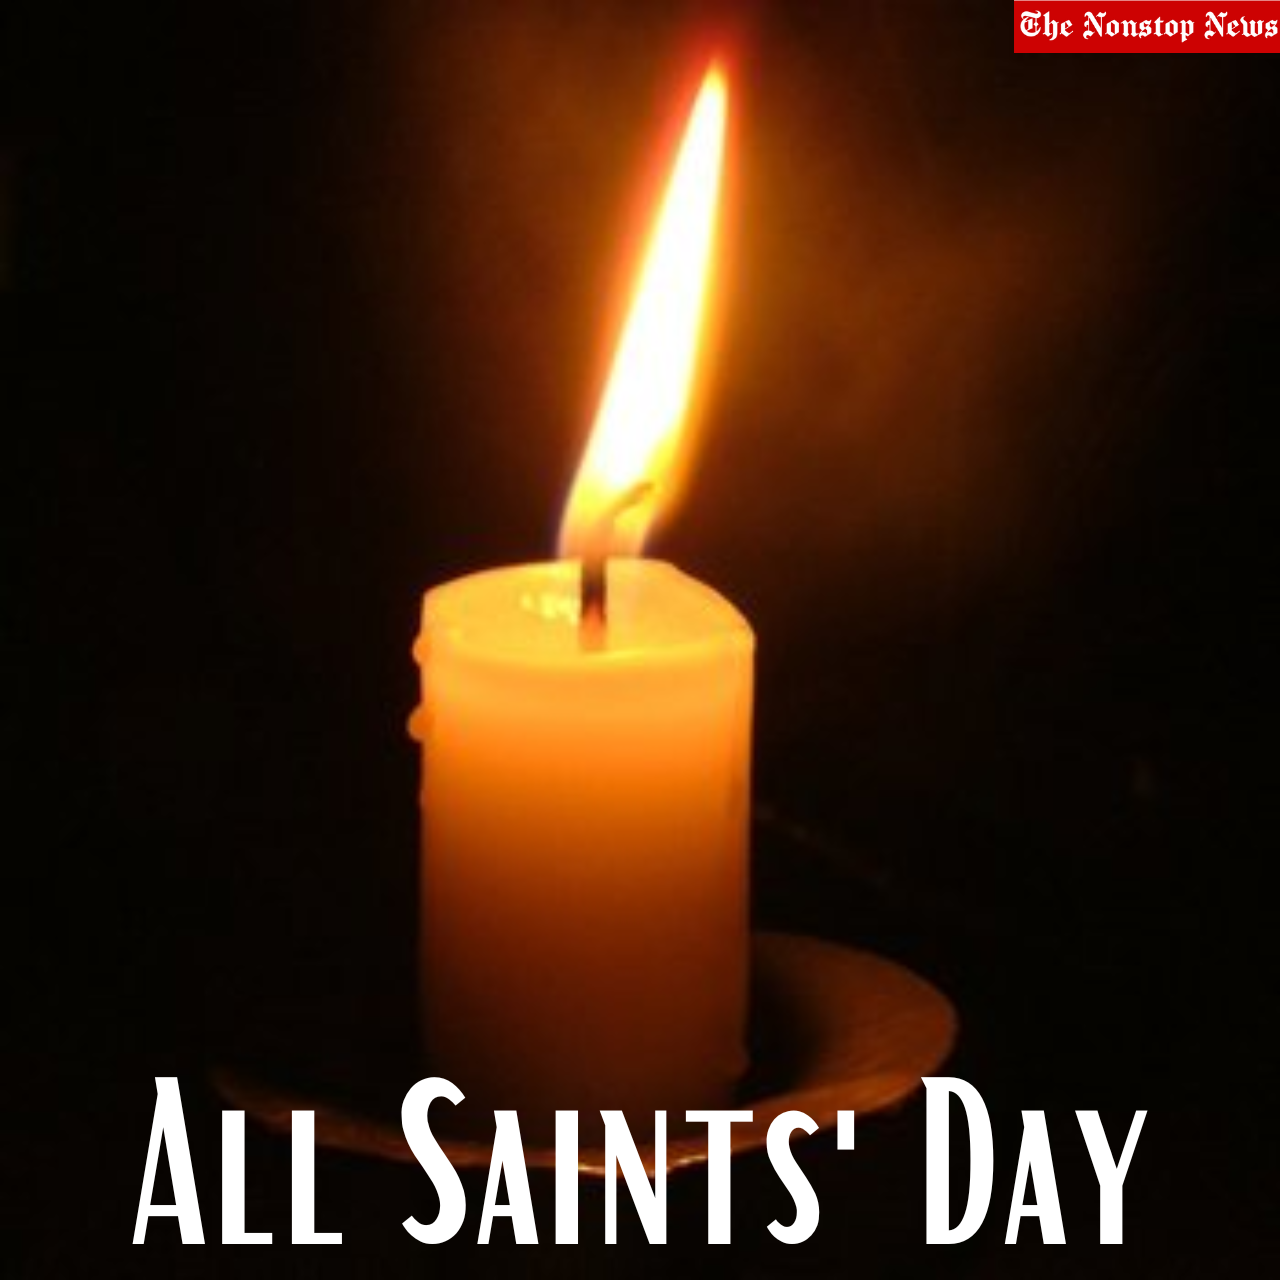 All Saints' Day 2022 Greetings, Sayings, Quotes, Images, Messages, Wishes, Posters, and Stickers